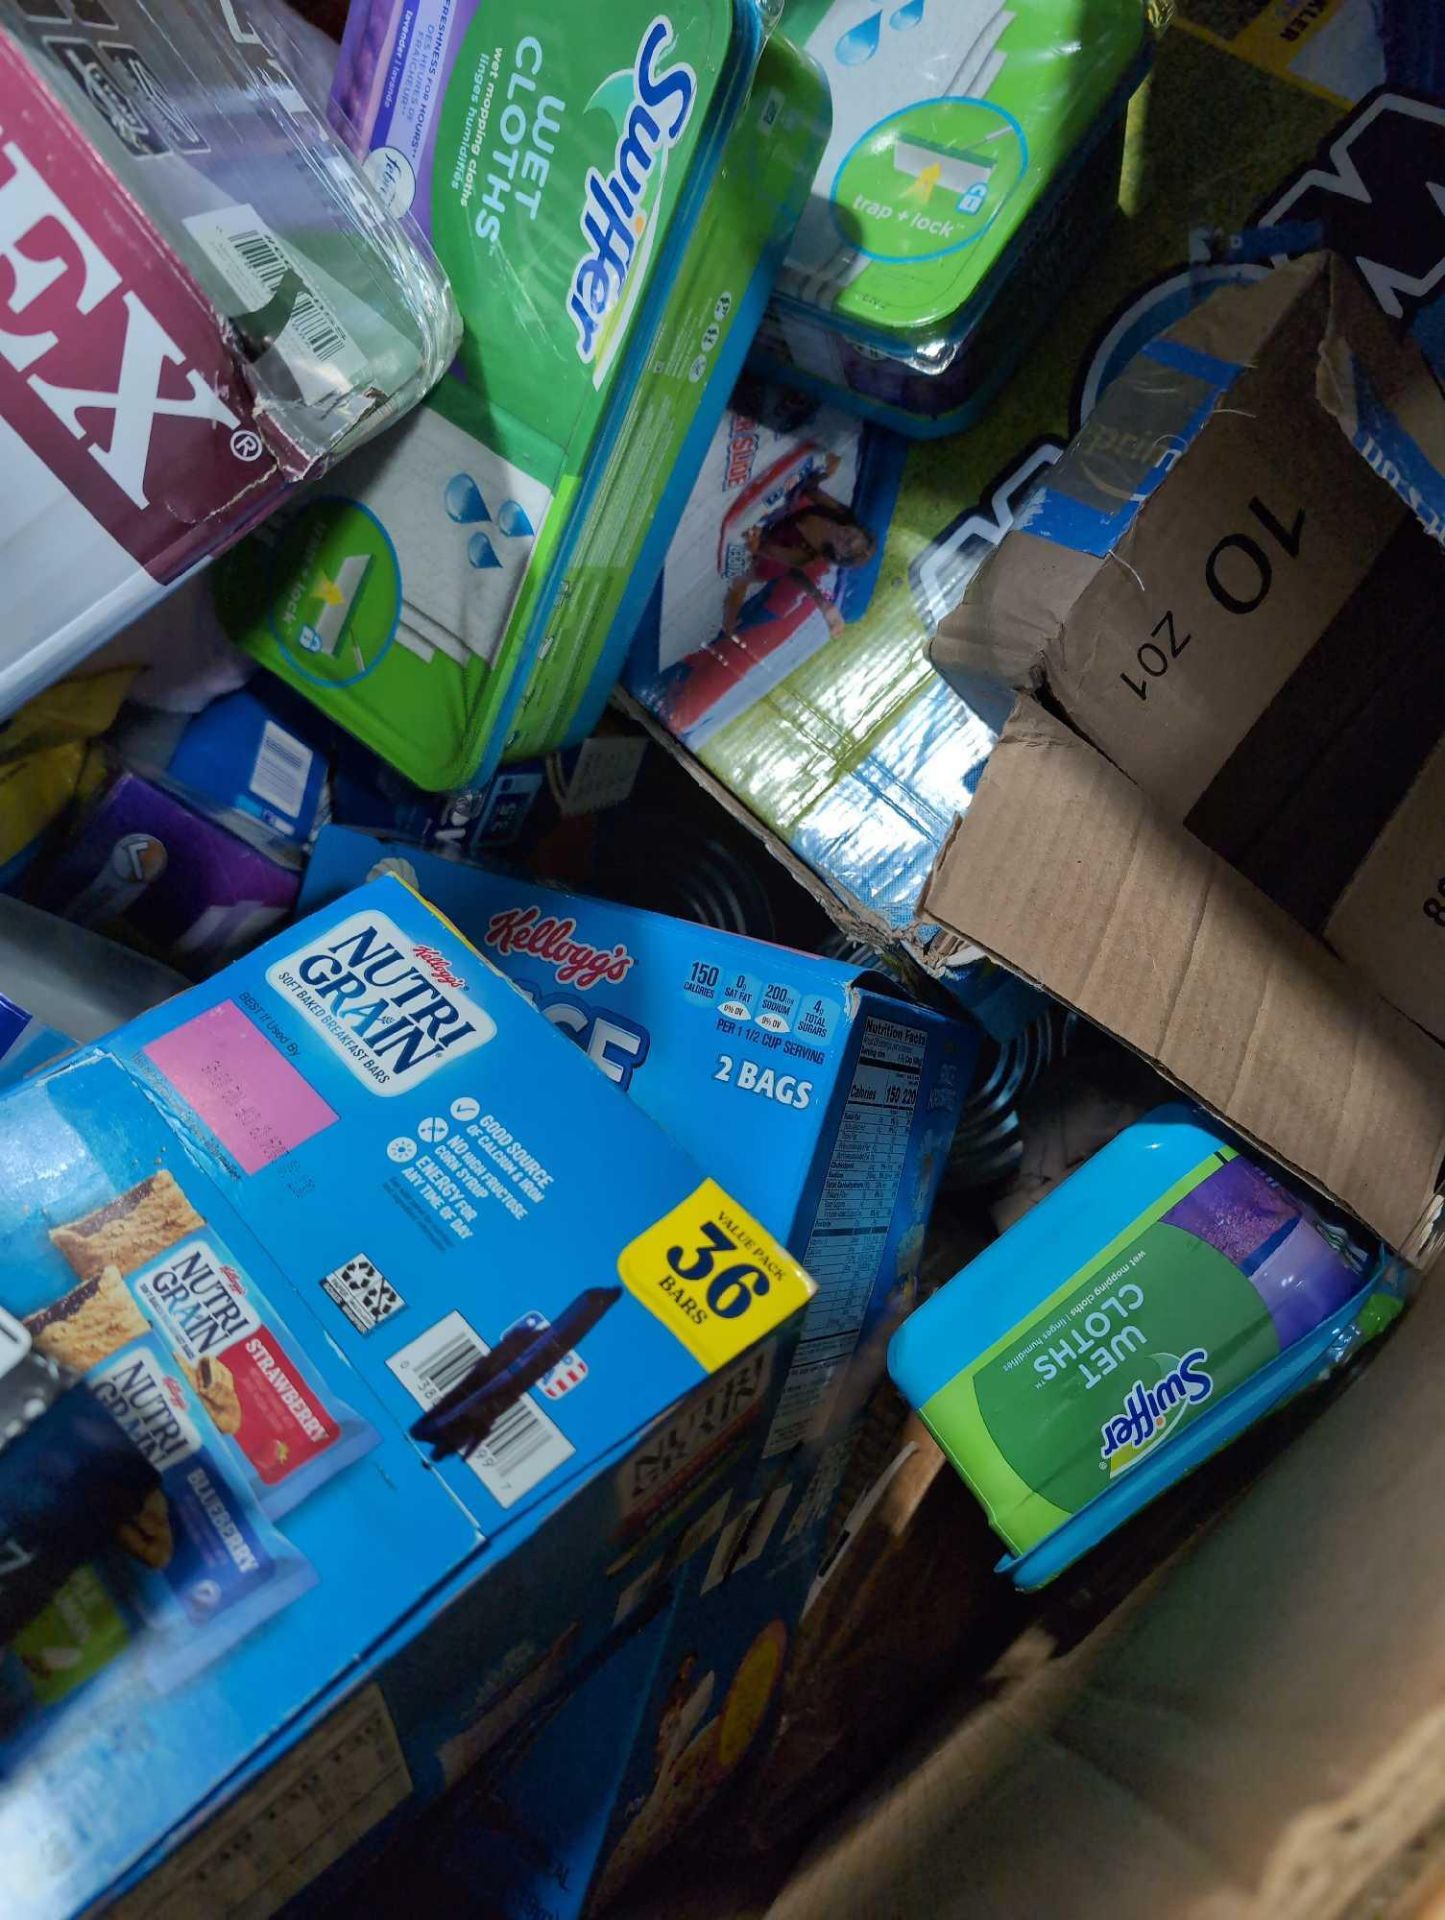 Big box store in a box, pampers, Sheets, Blanket, Intex blow up bed, swiffer wet cloths, gold fish, - Image 20 of 20